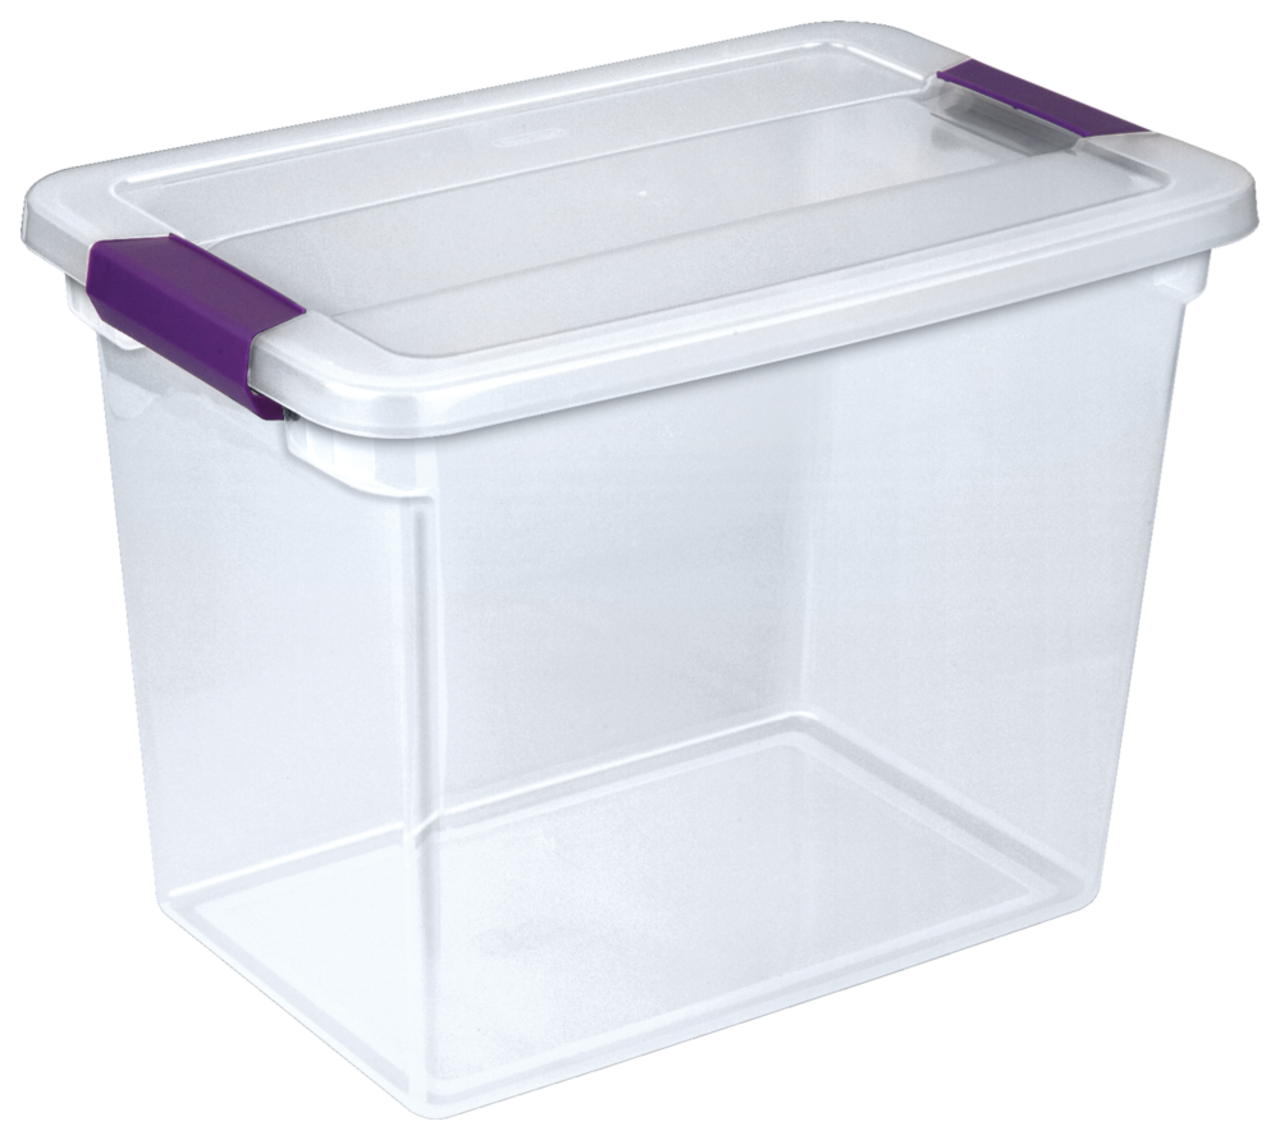 https://media-www.canadiantire.ca/product/living/home-organization/storage-containers/1426056/sterilite-clearview-tote-with-latch-26l-e34e043d-01b4-4ba3-bd56-2da09d71df5e.png?imdensity=1&imwidth=640&impolicy=mZoom